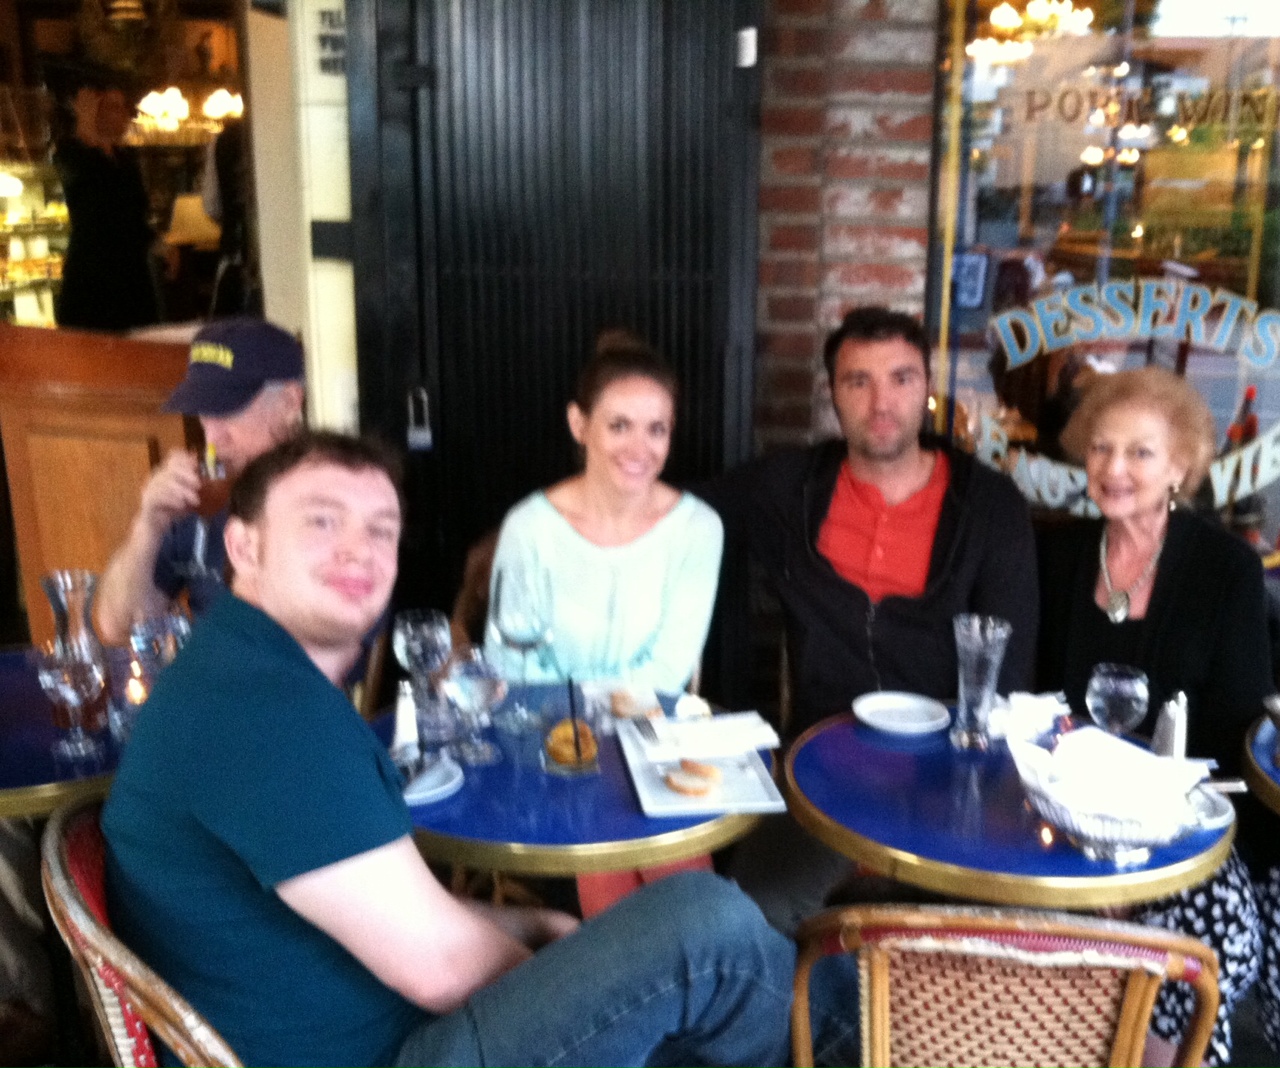 Jane Shayne, Happy to Happy Hour it Bistro Style at Figaro Bistrot, Los Feliz with Total Talents: L to R: Shawn deLoache; Katherine Randolph; Alex Randolph; (and me, Jane Shayne) 6-6-2013 Iphone Candid